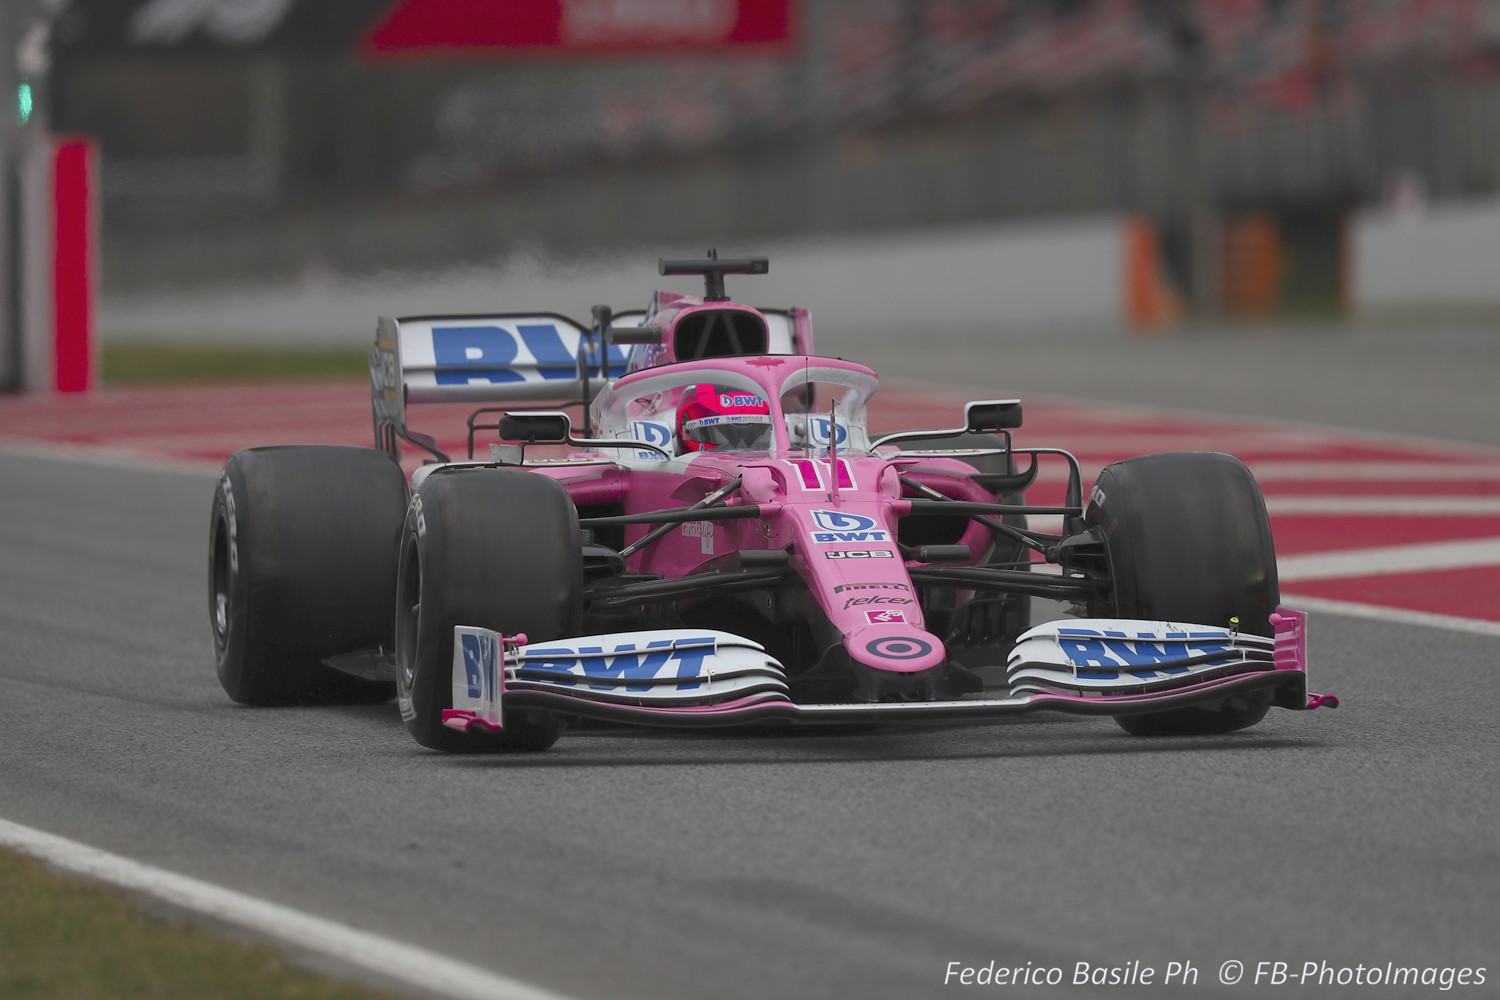 Clearly the Aston Martin Racing Point 'pink' Mercedes is a near 100% copy of last year's Mercedes